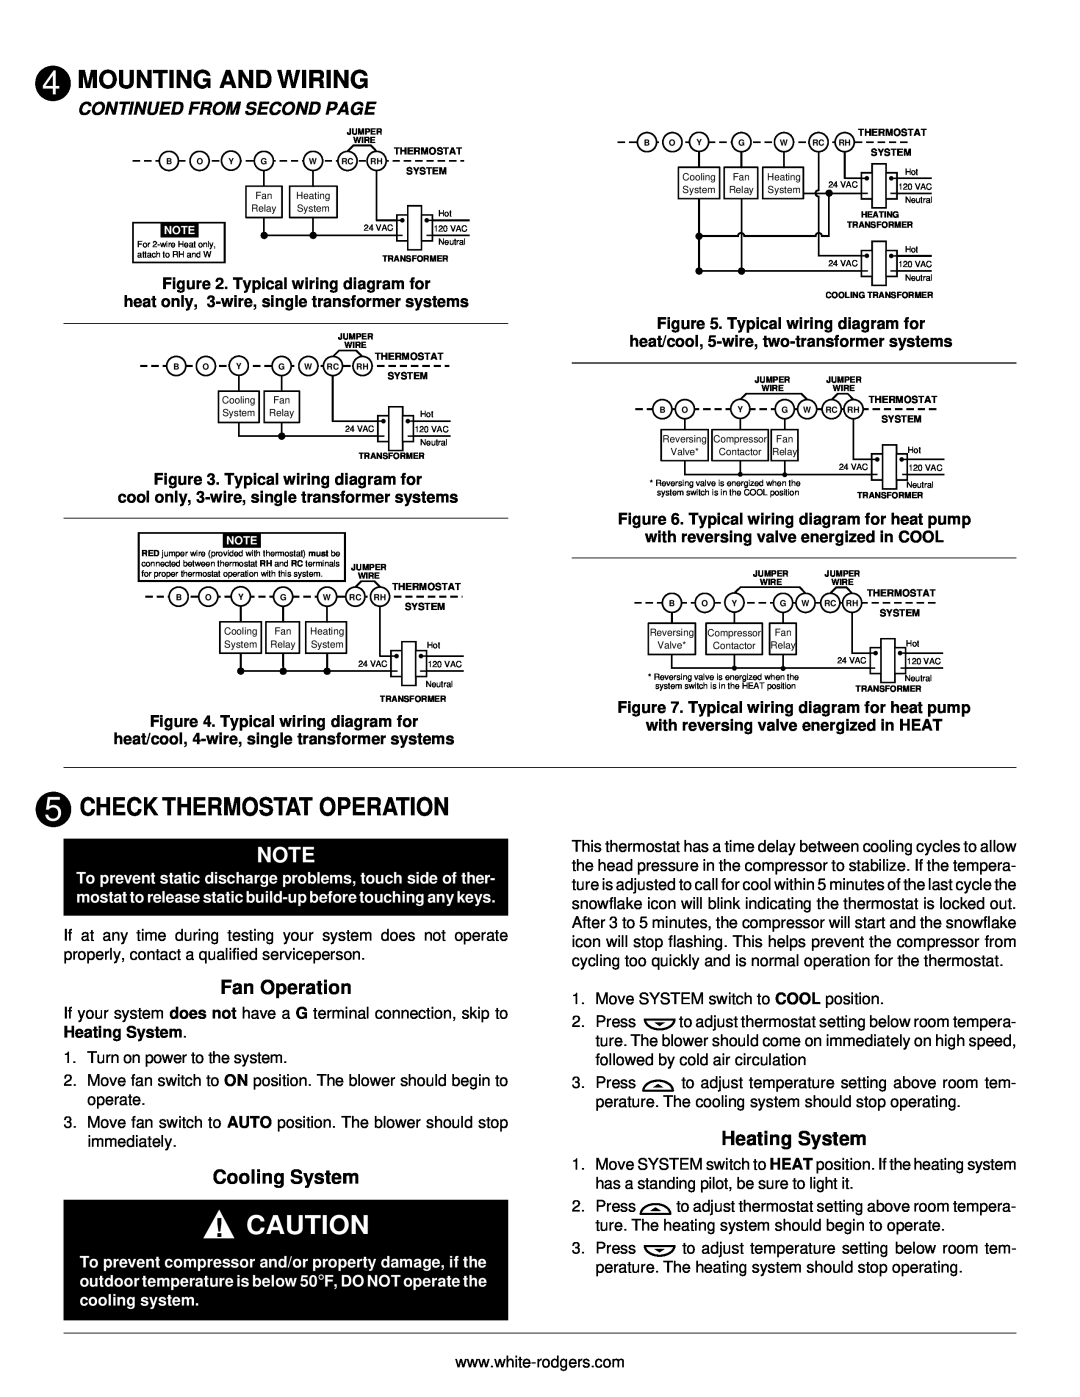 White Rodgers 775 Check Thermostat Operation, Fan Operation, Cooling System, Heating System, Continued From Second Page 